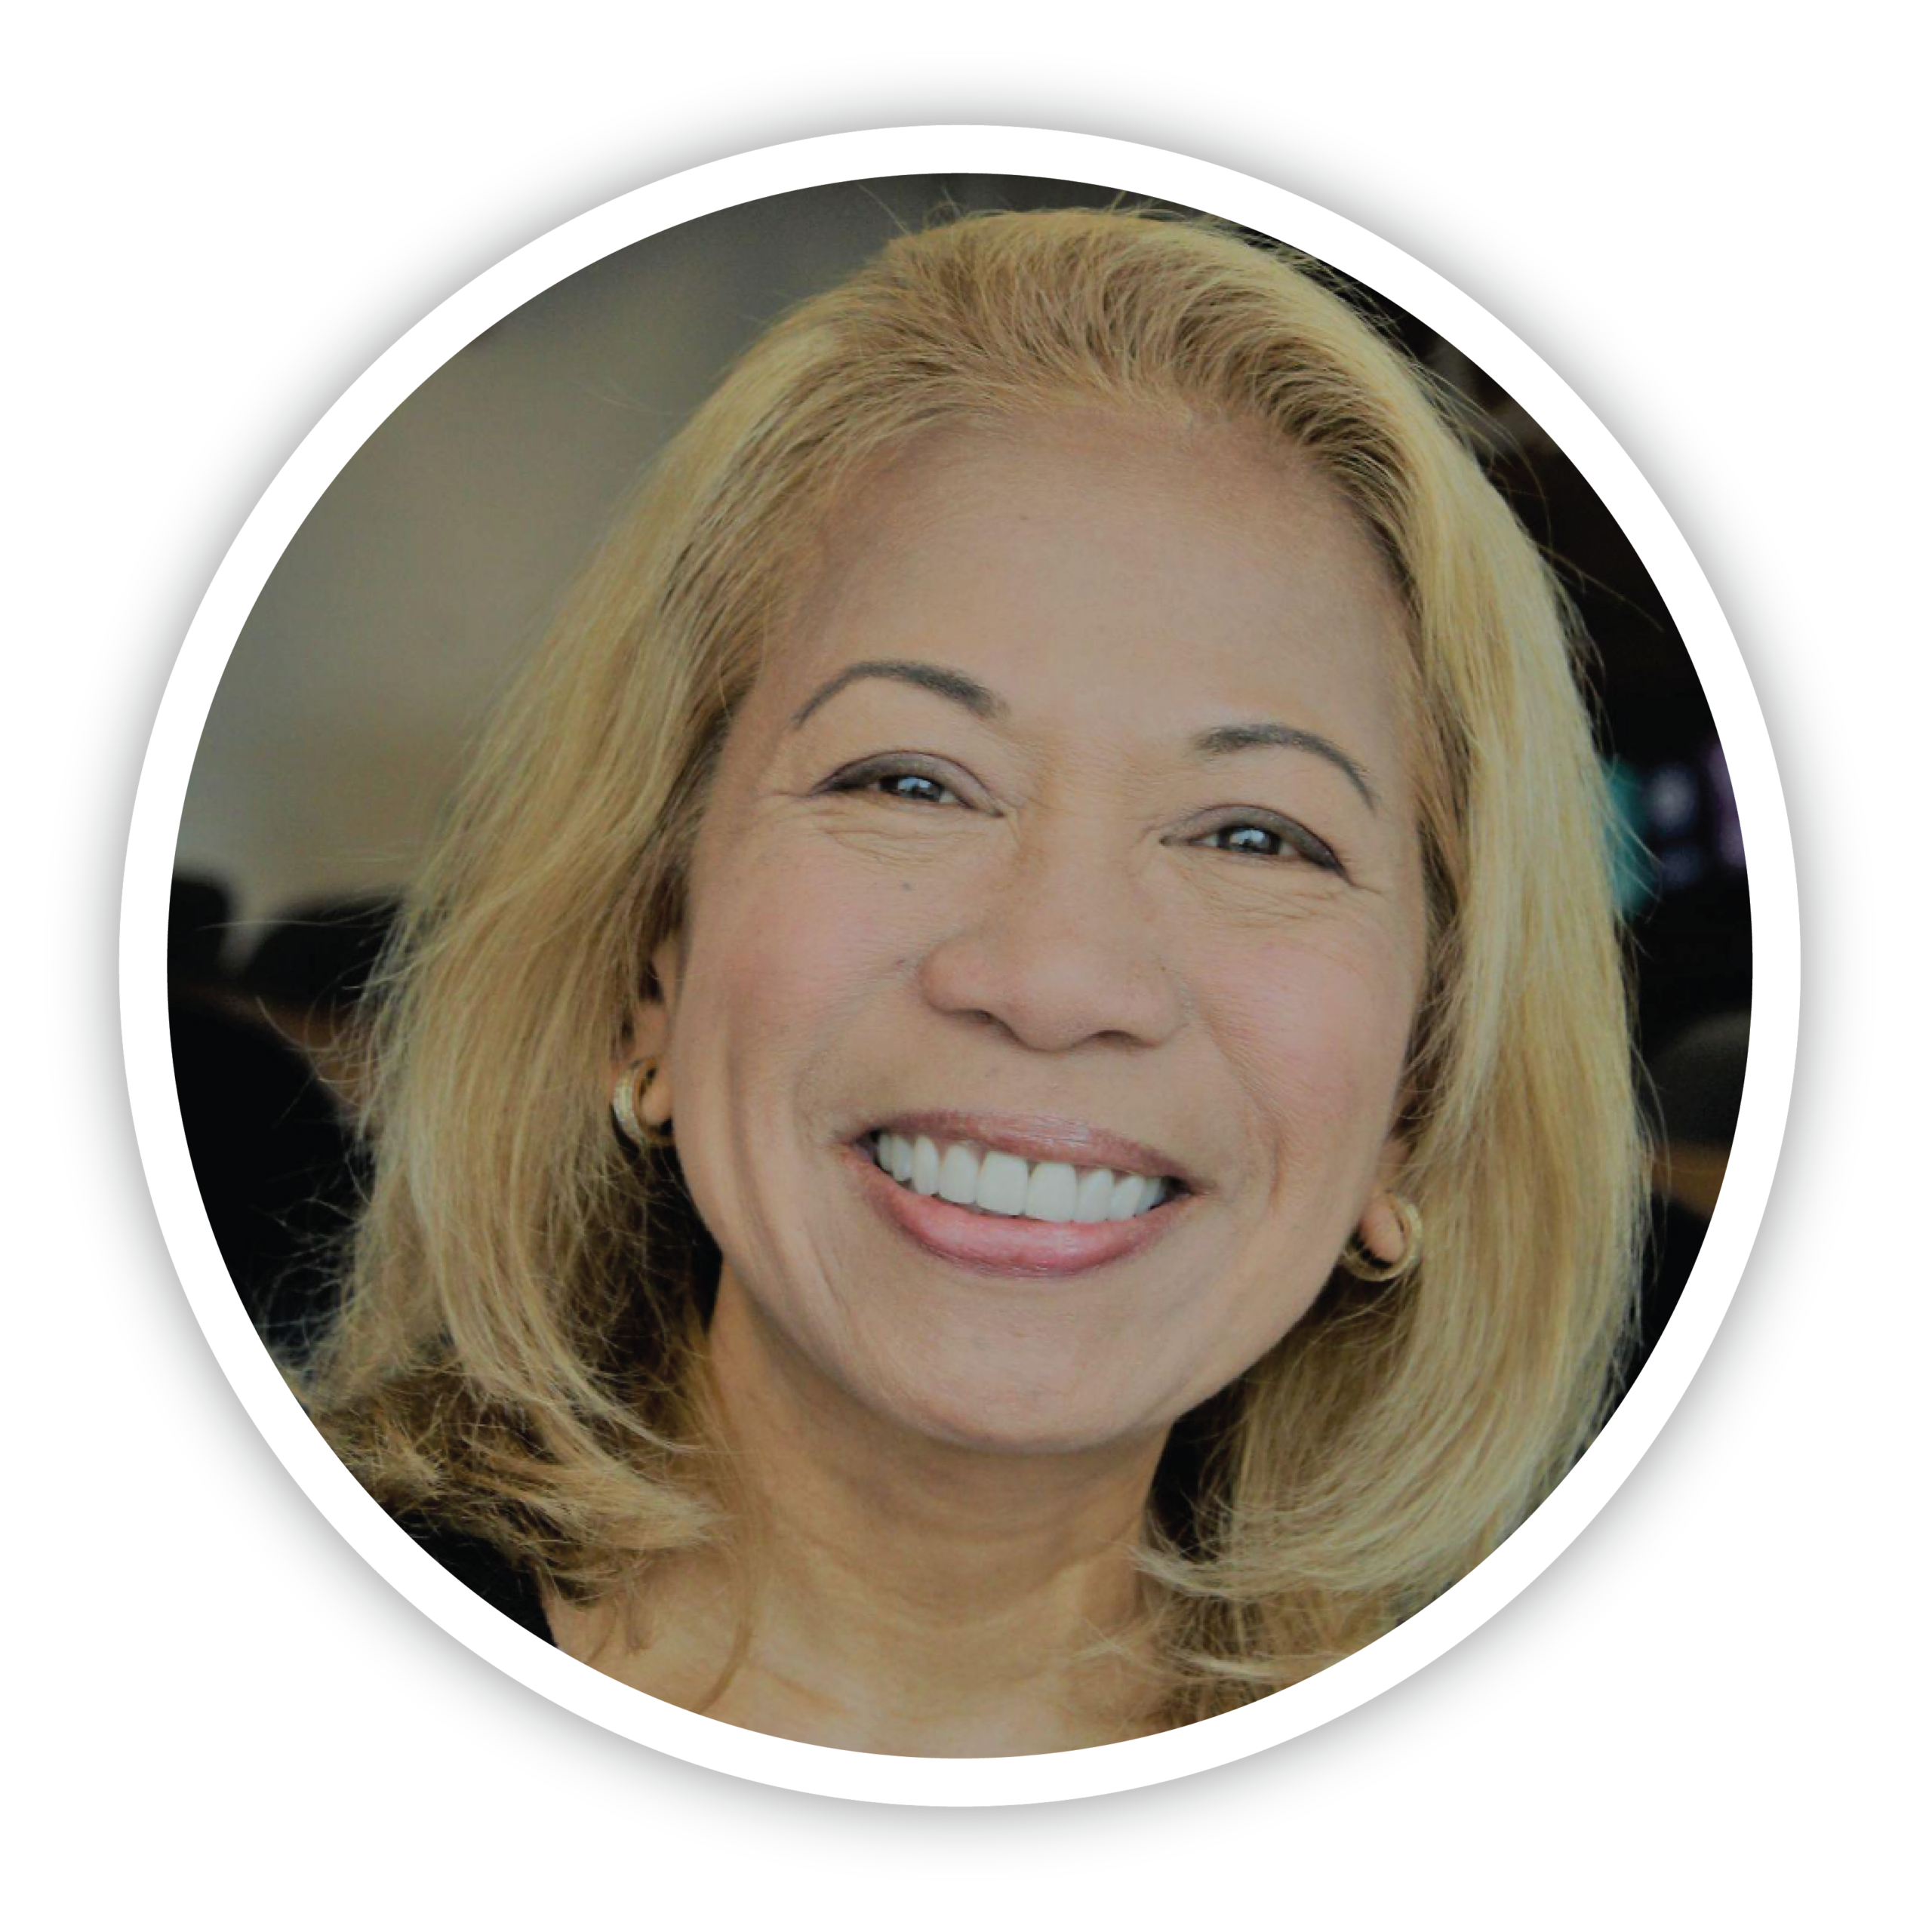 Meet Roselle Rogers, Executive Director, DEI Strategy at Mitratech